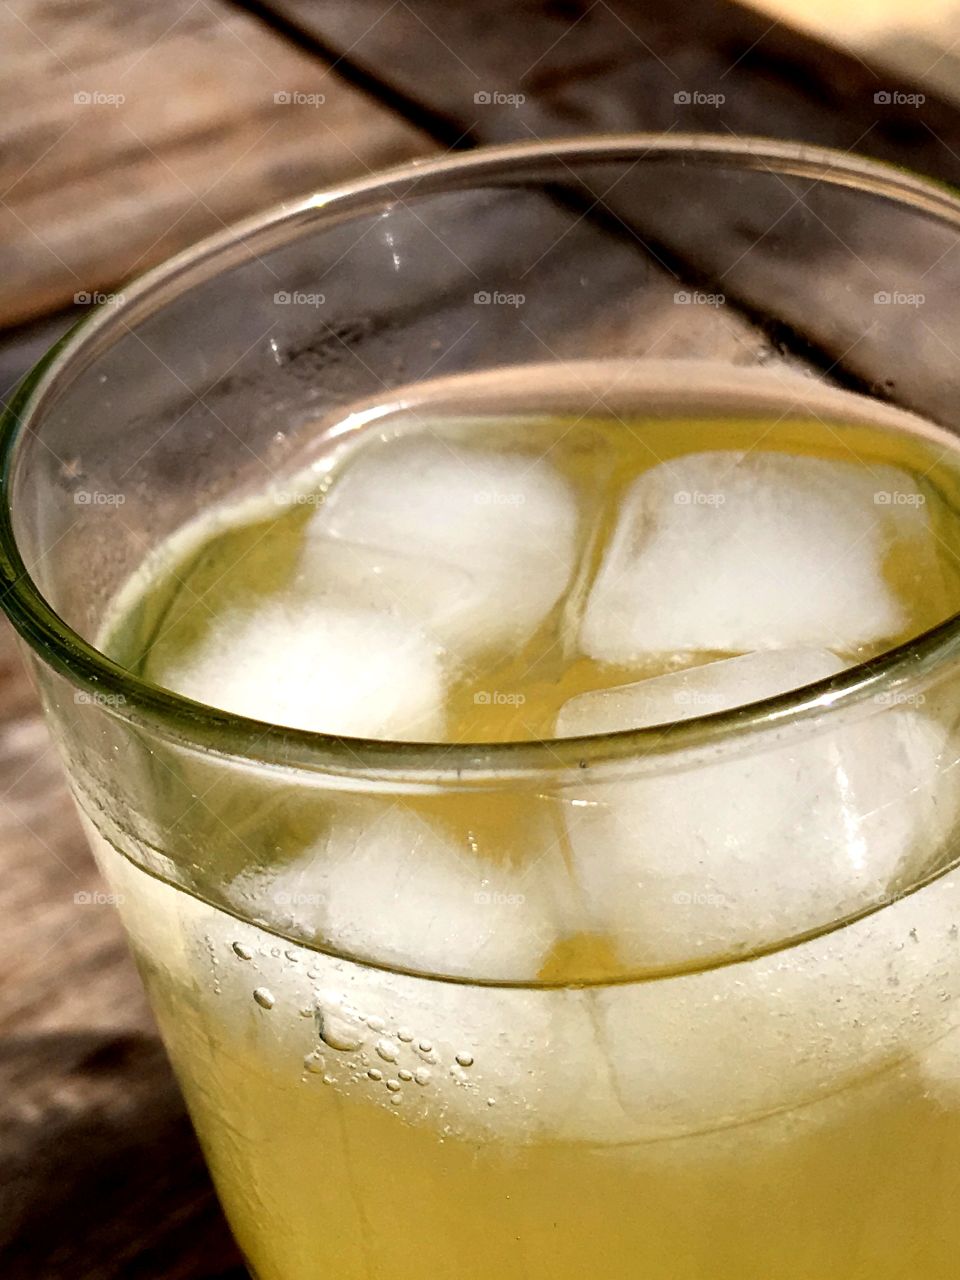 A welcome treat when the weather is hot. A cold beverage with ice cubes